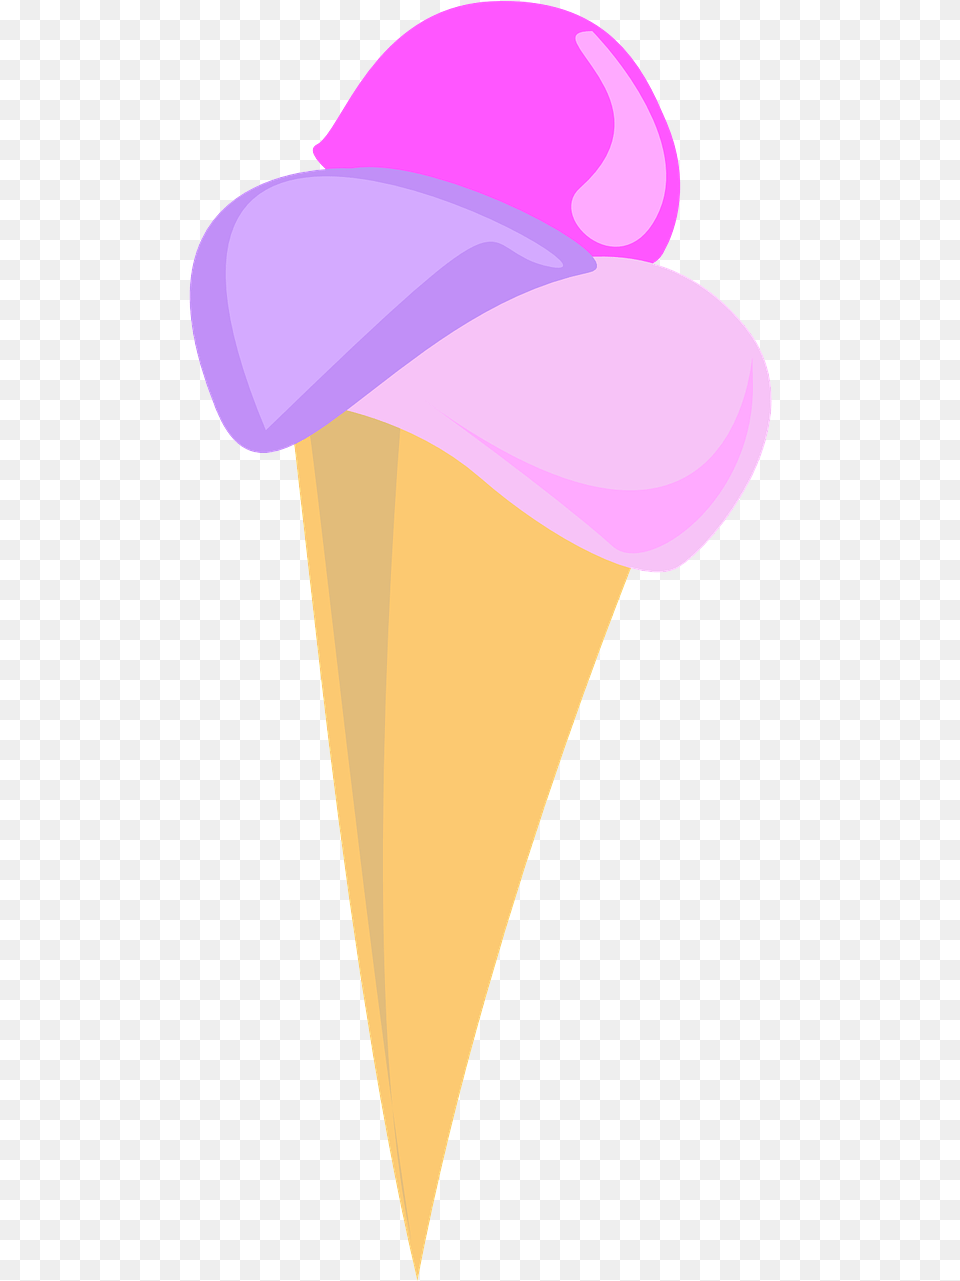 Ice Vector Graphicsfree Pictures Photos Ice Cream Cartoon, Dessert, Food, Ice Cream, Clothing Free Png